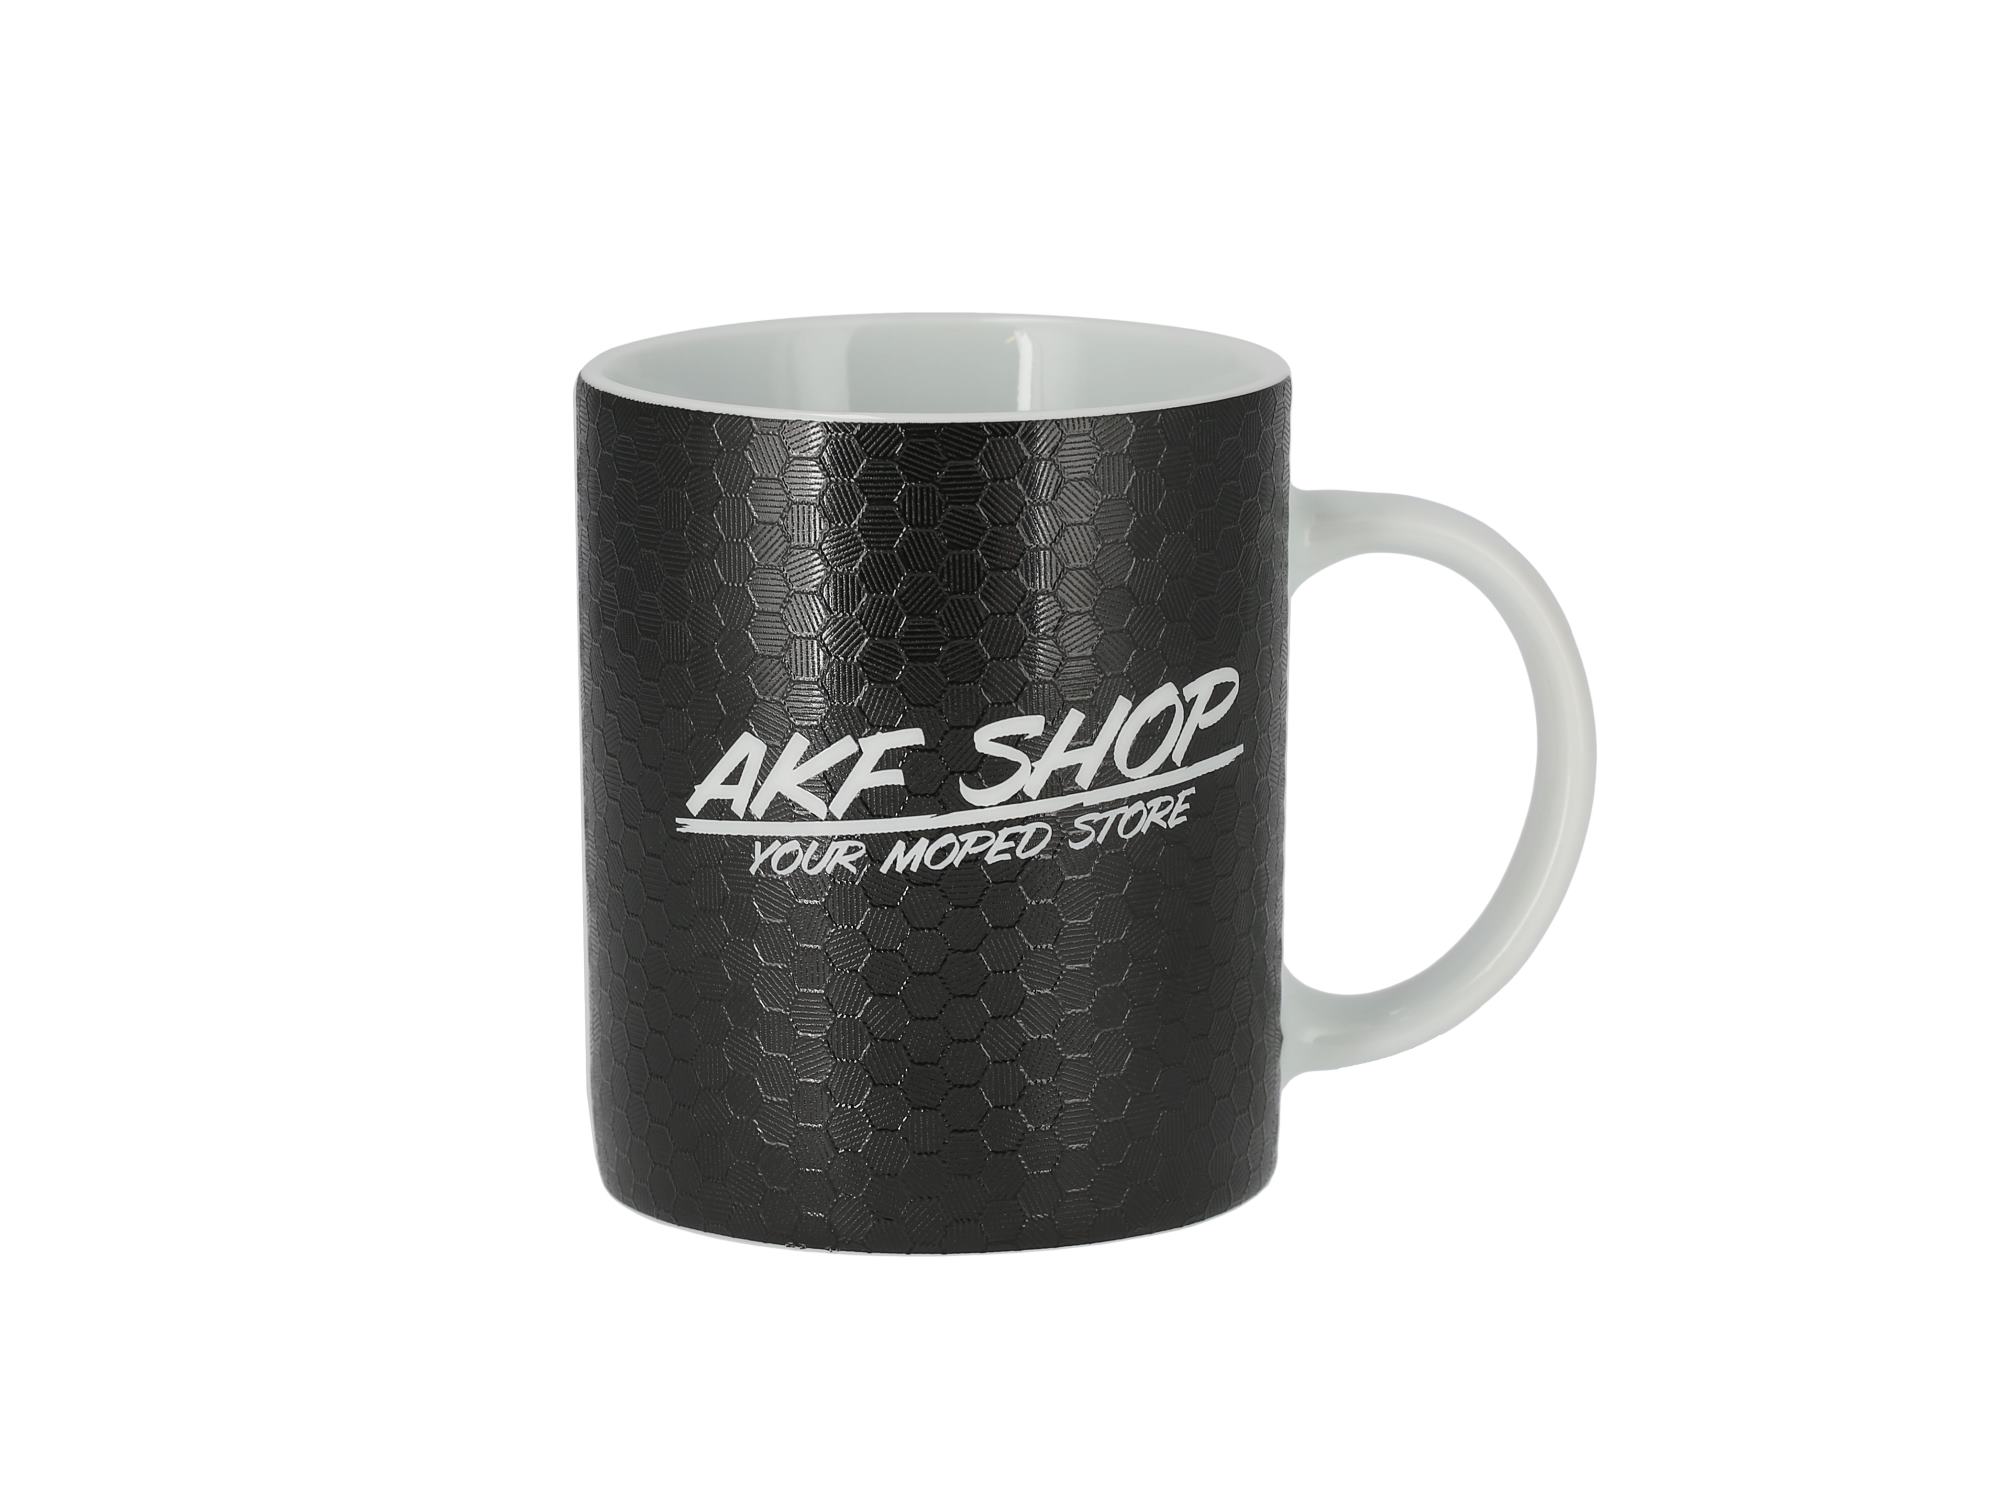 Tasse AKF Shop your moped store - High Tec Structure & Innendruck - LIMITED EDITION, Art.-Nr.: 10070395 - 360° Bild